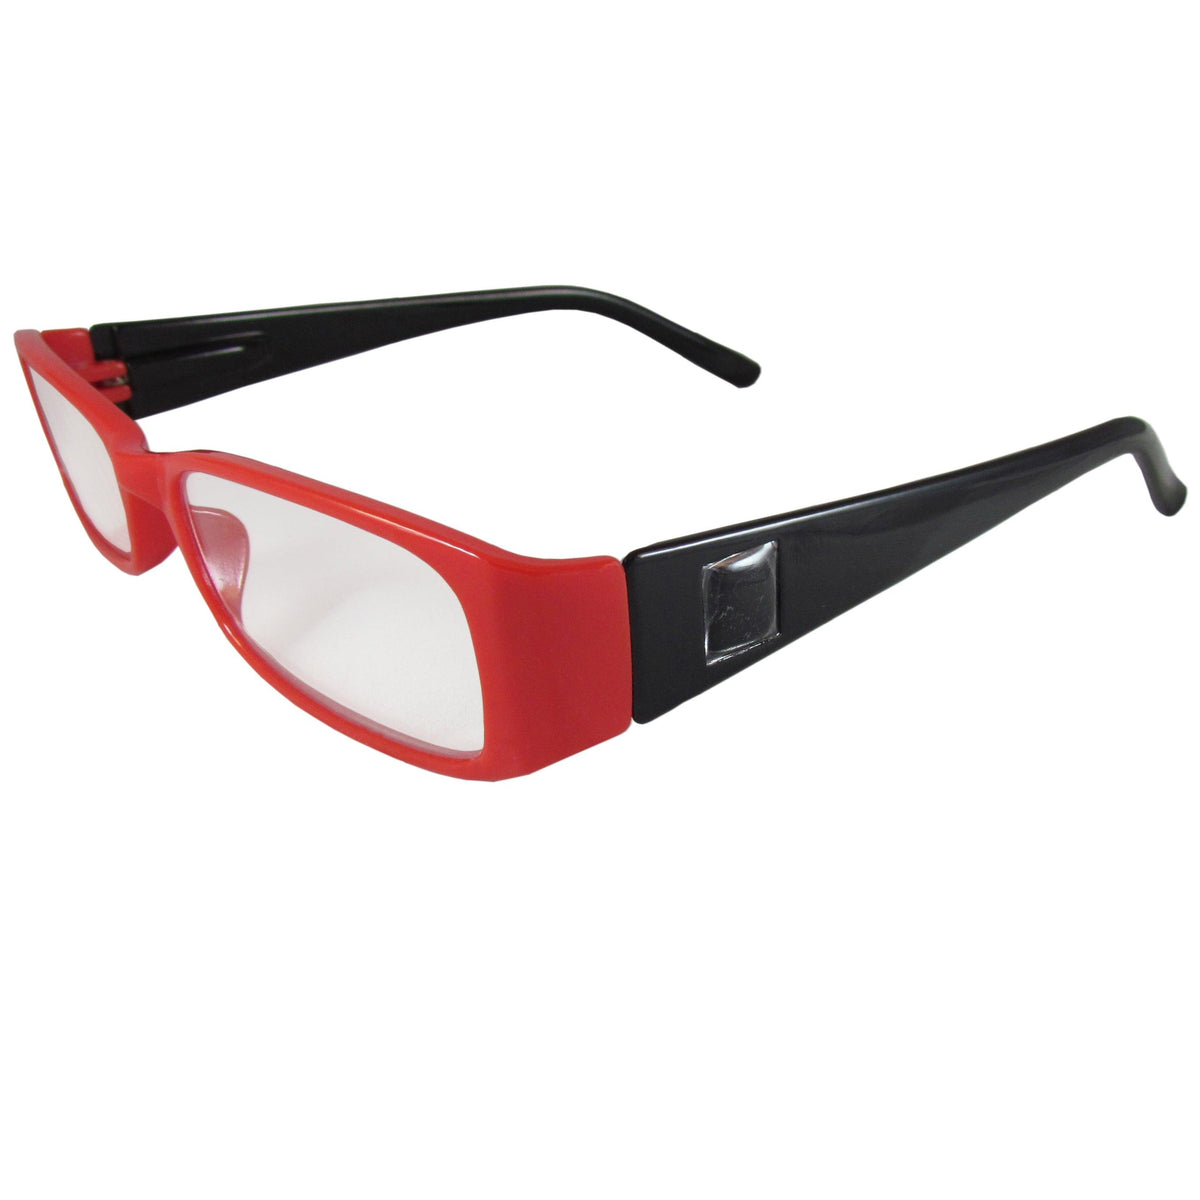 Red and Black Reading Glasses Power +2.25, 3 pack - Flyclothing LLC